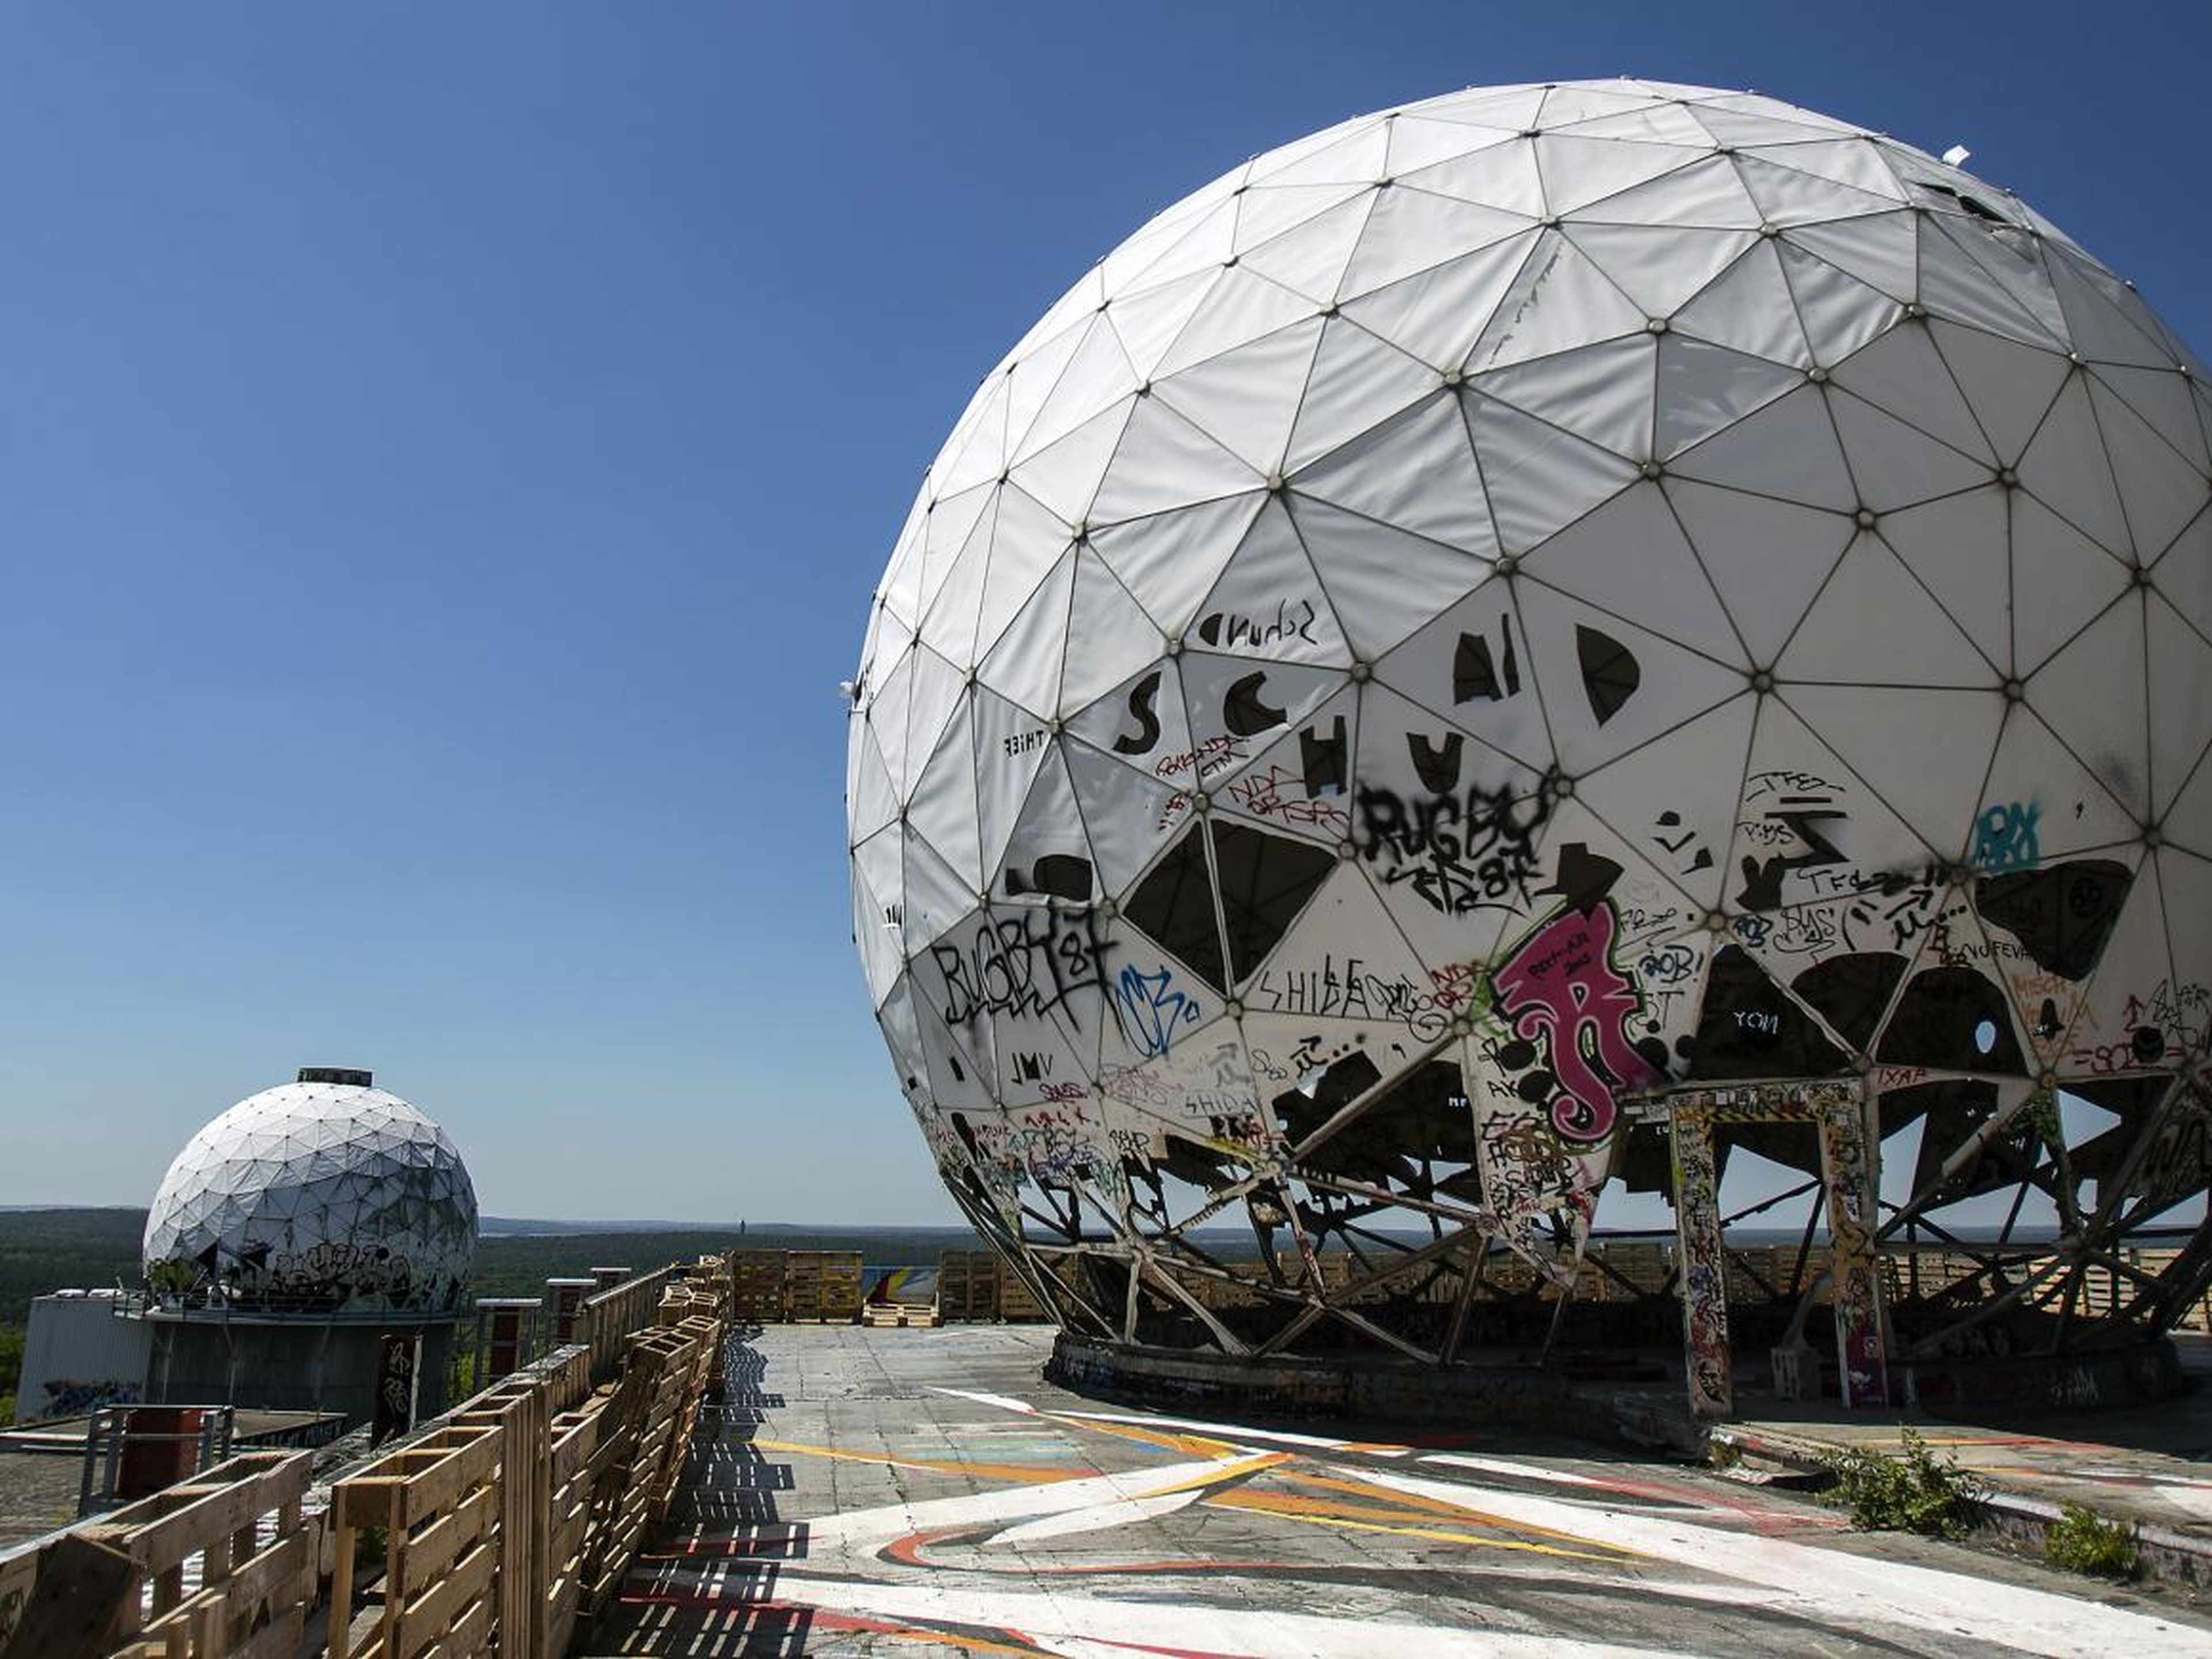 These strange dome structures sit atop a manmade hill in Berlin.